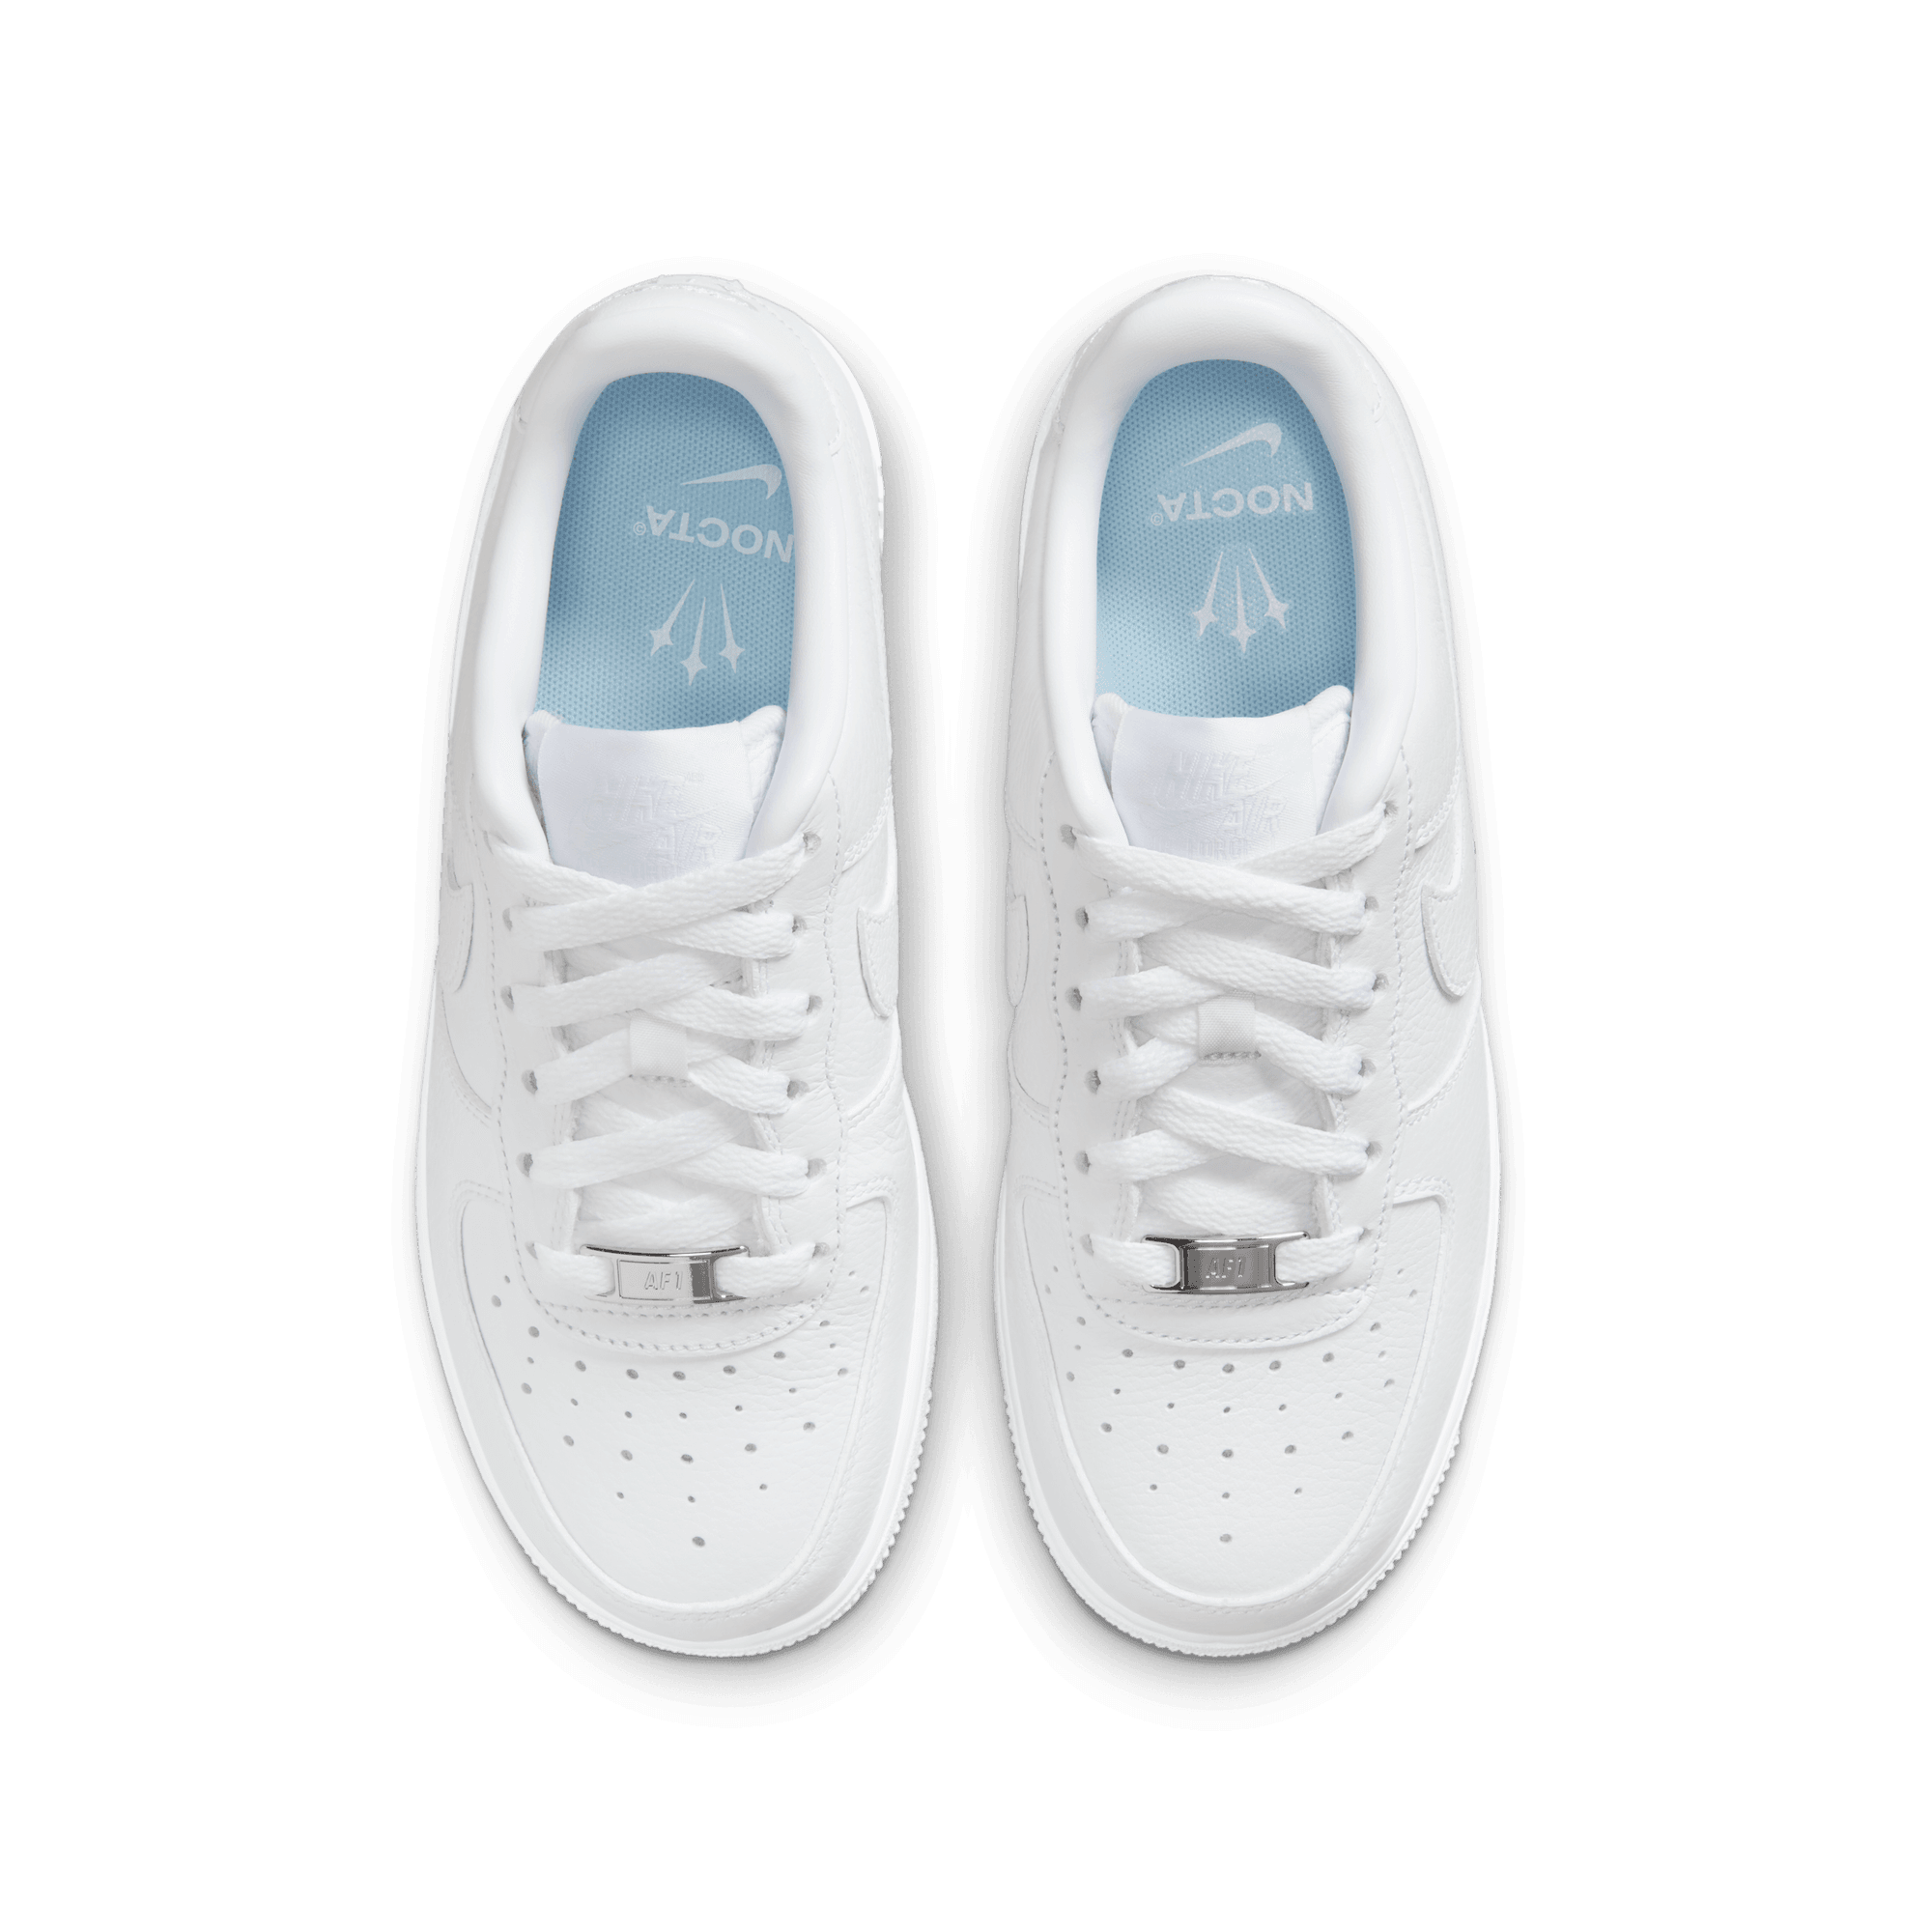 NOCTA X NIKE AIR FORCE 1 LOW (GS) "CERTIFIED LOVER BOY"